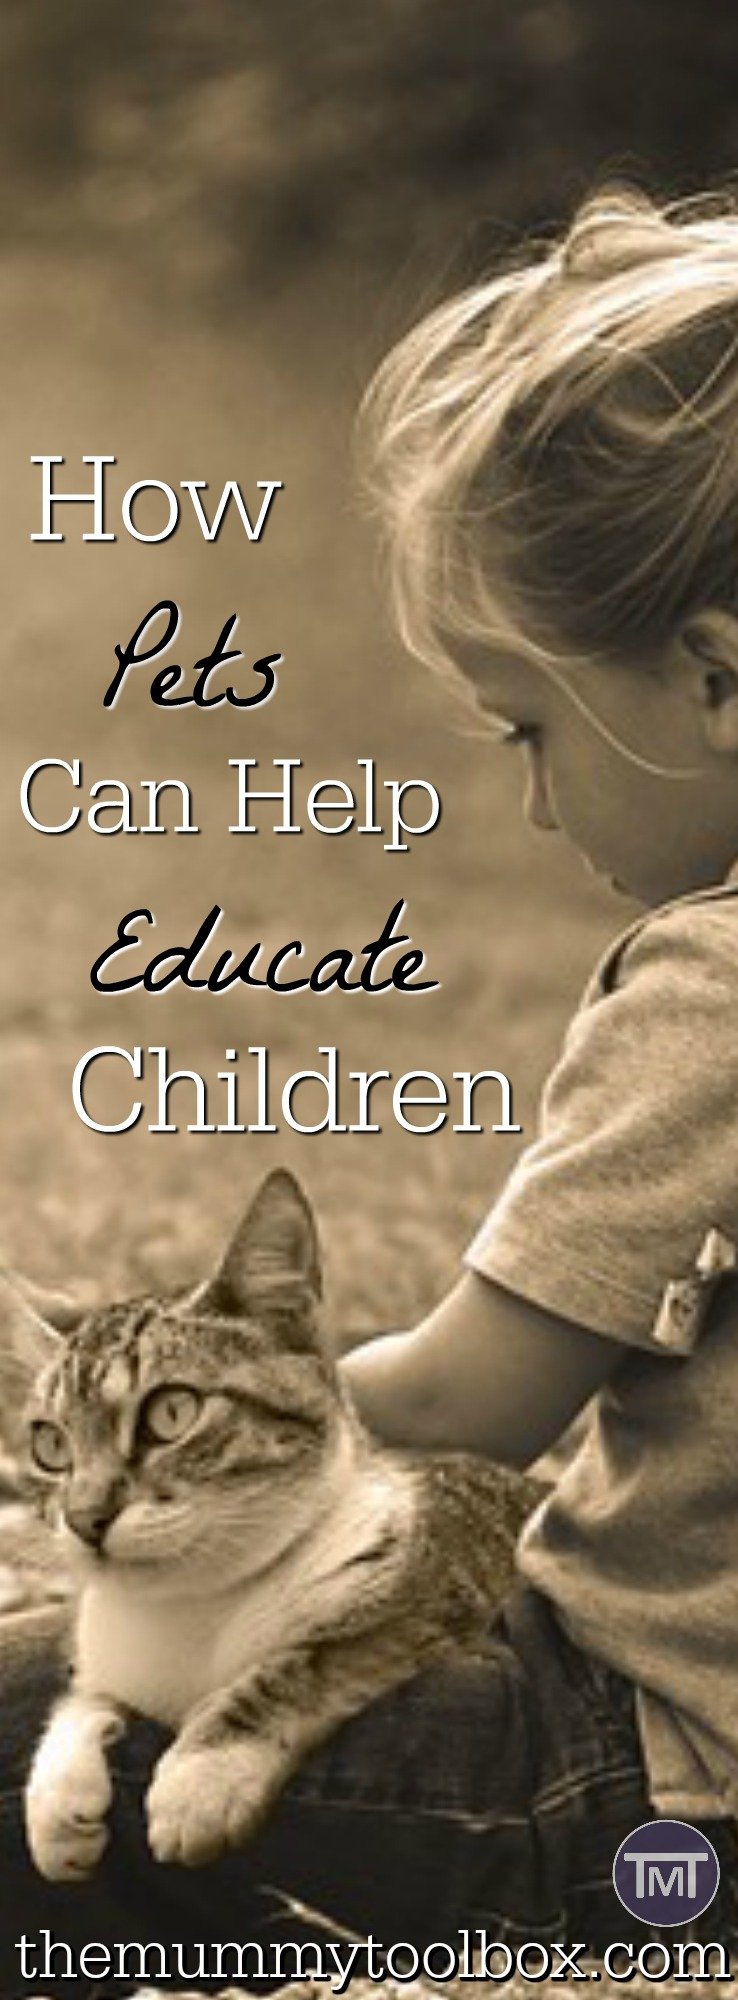 A fantastic guest post on how pets educate children and the role that they play in their upbringing! If you don't have pets, see how they can help!